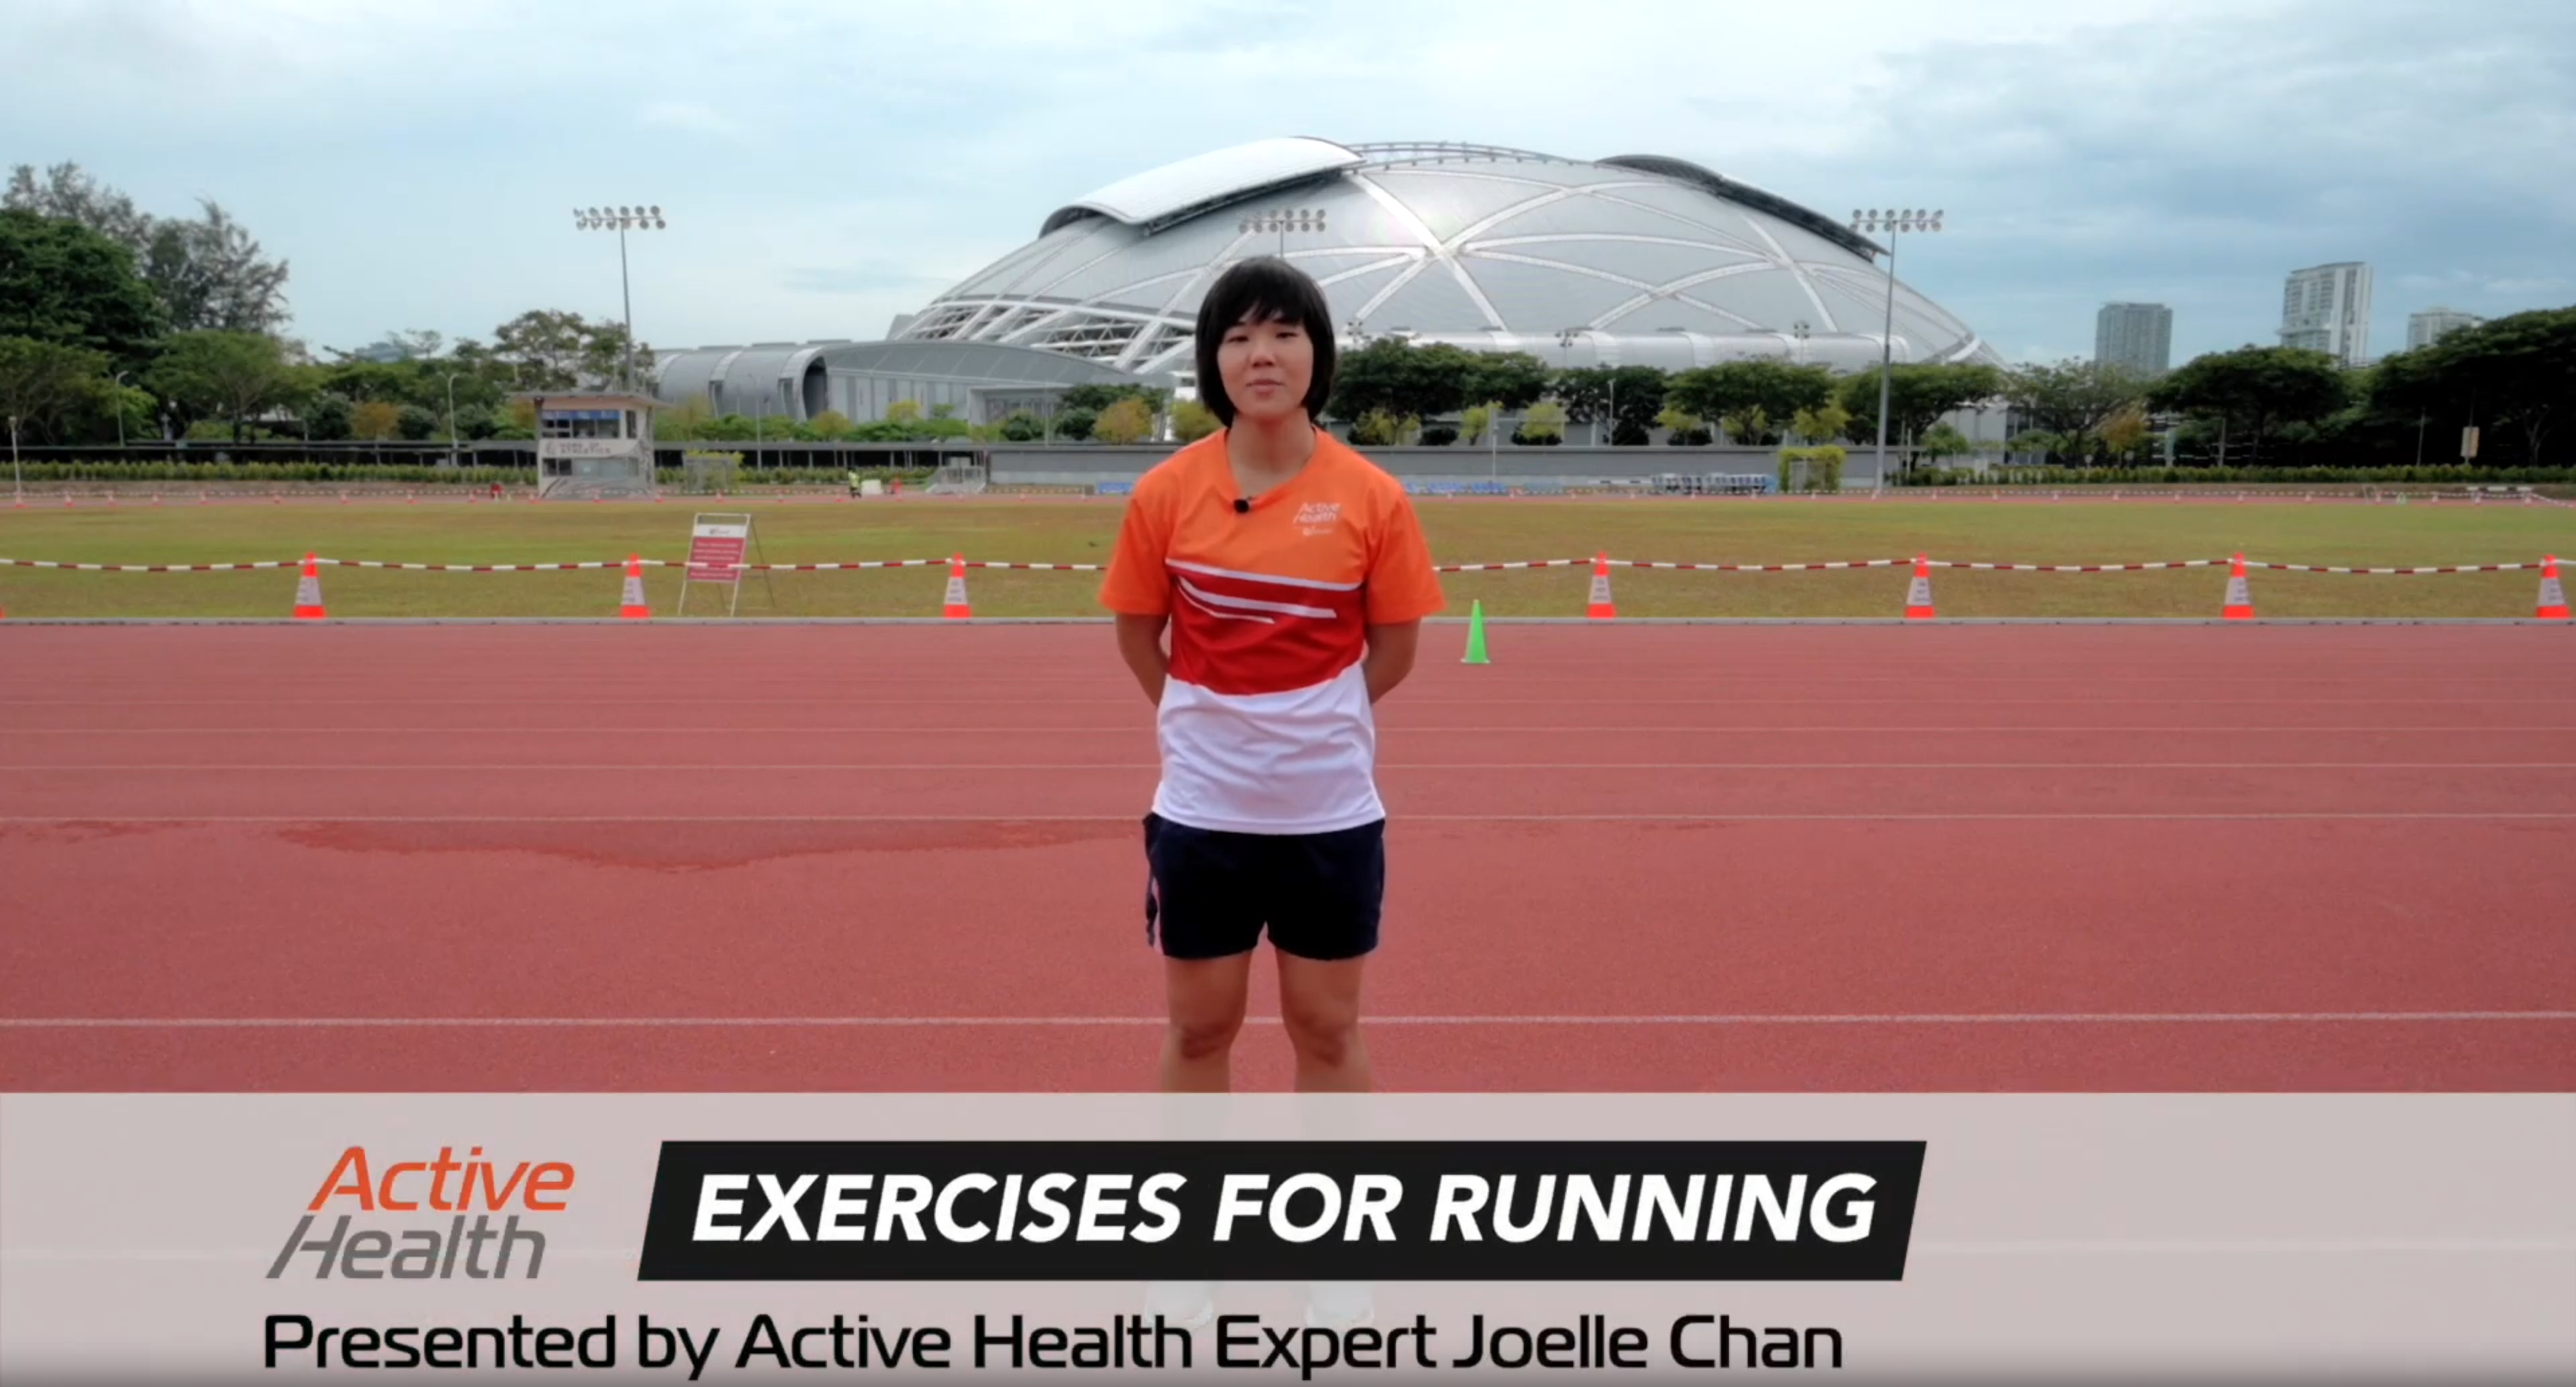 Ep 1 - 5 Simples Exercises To Improve Your Running Skills | Active Health